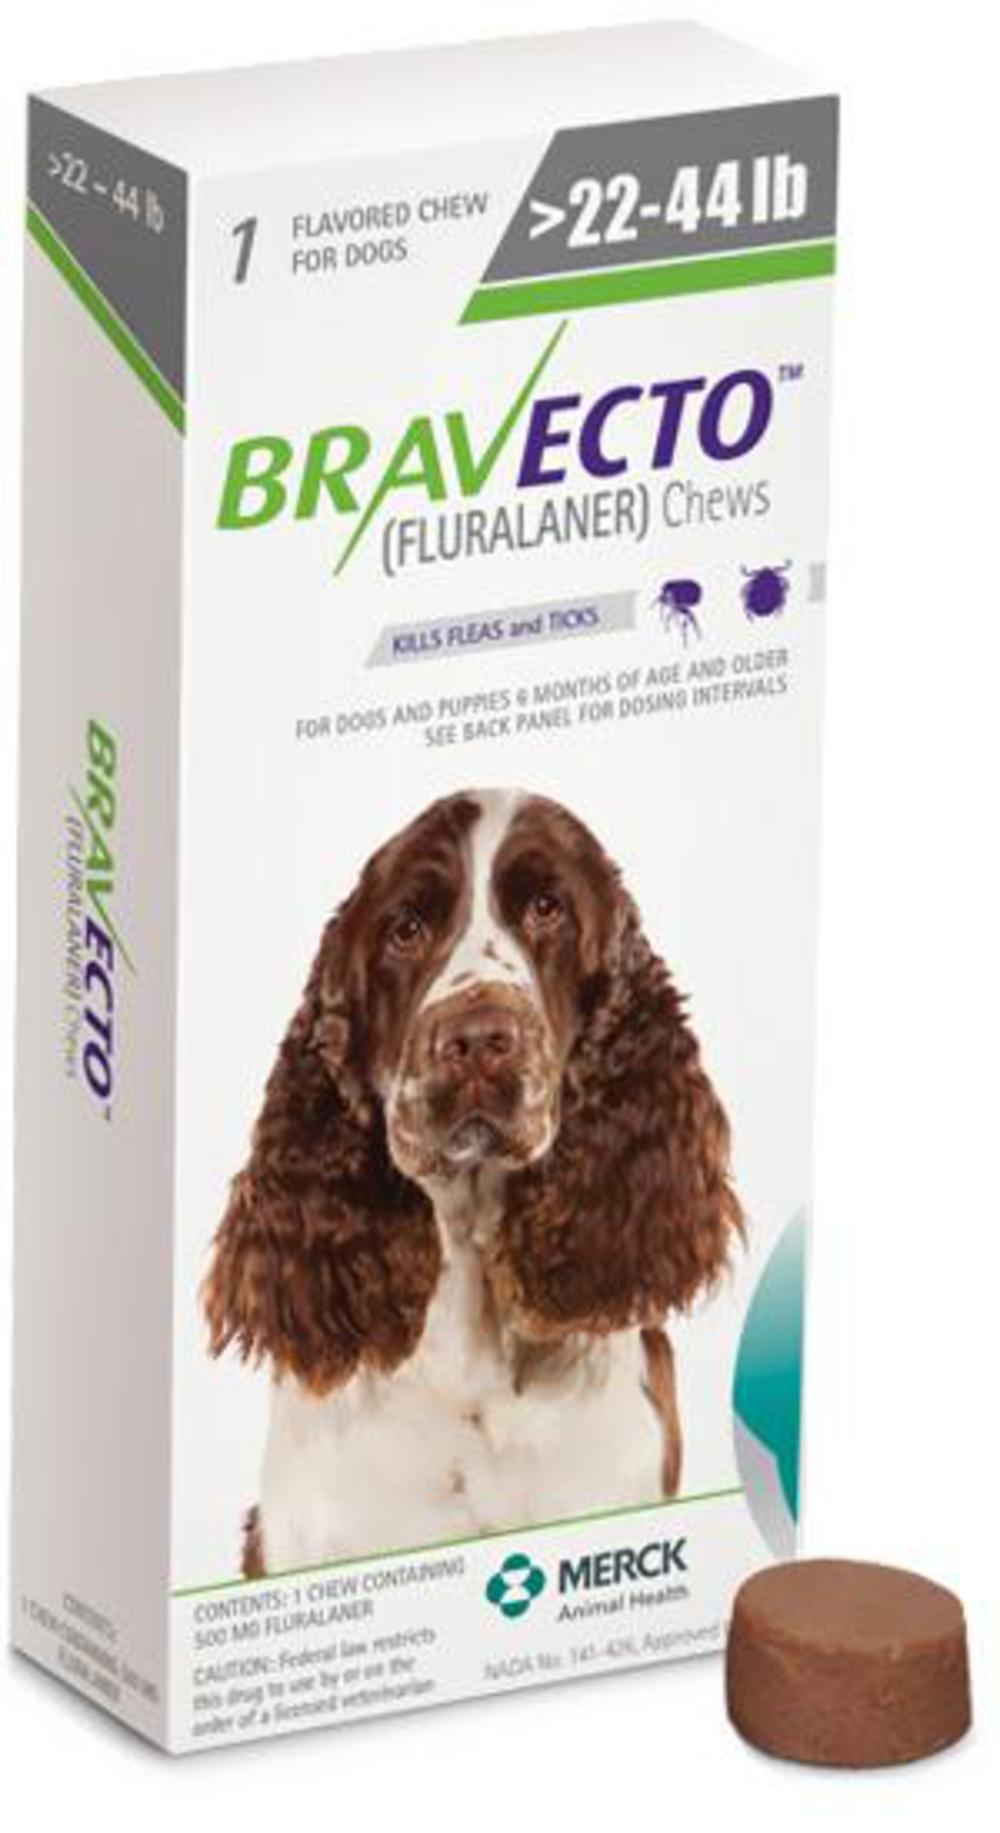 Pet Meds, No Prescription Required - Bravecto for Dogs 22-44#